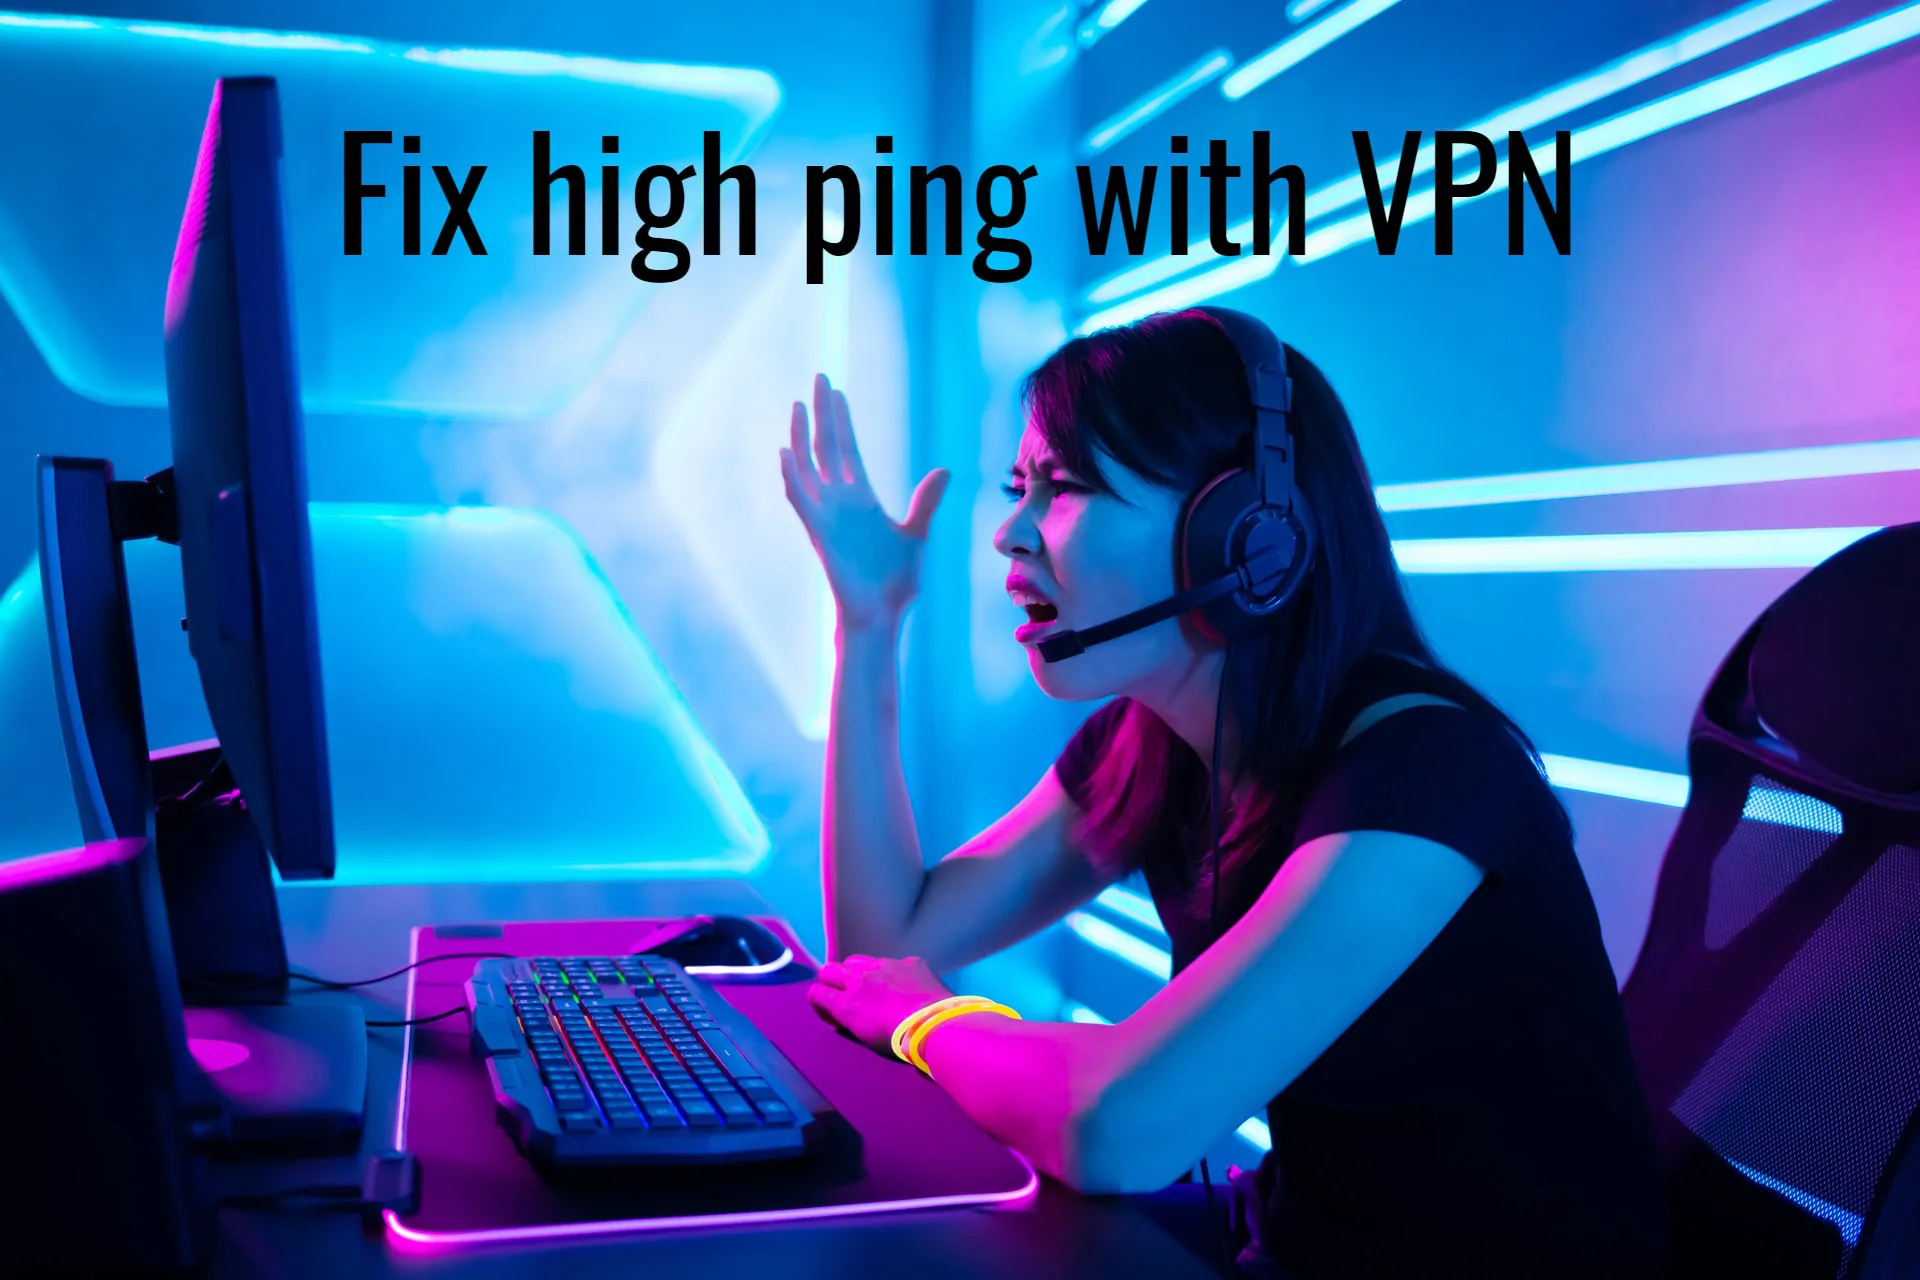 fix high ping with VPN